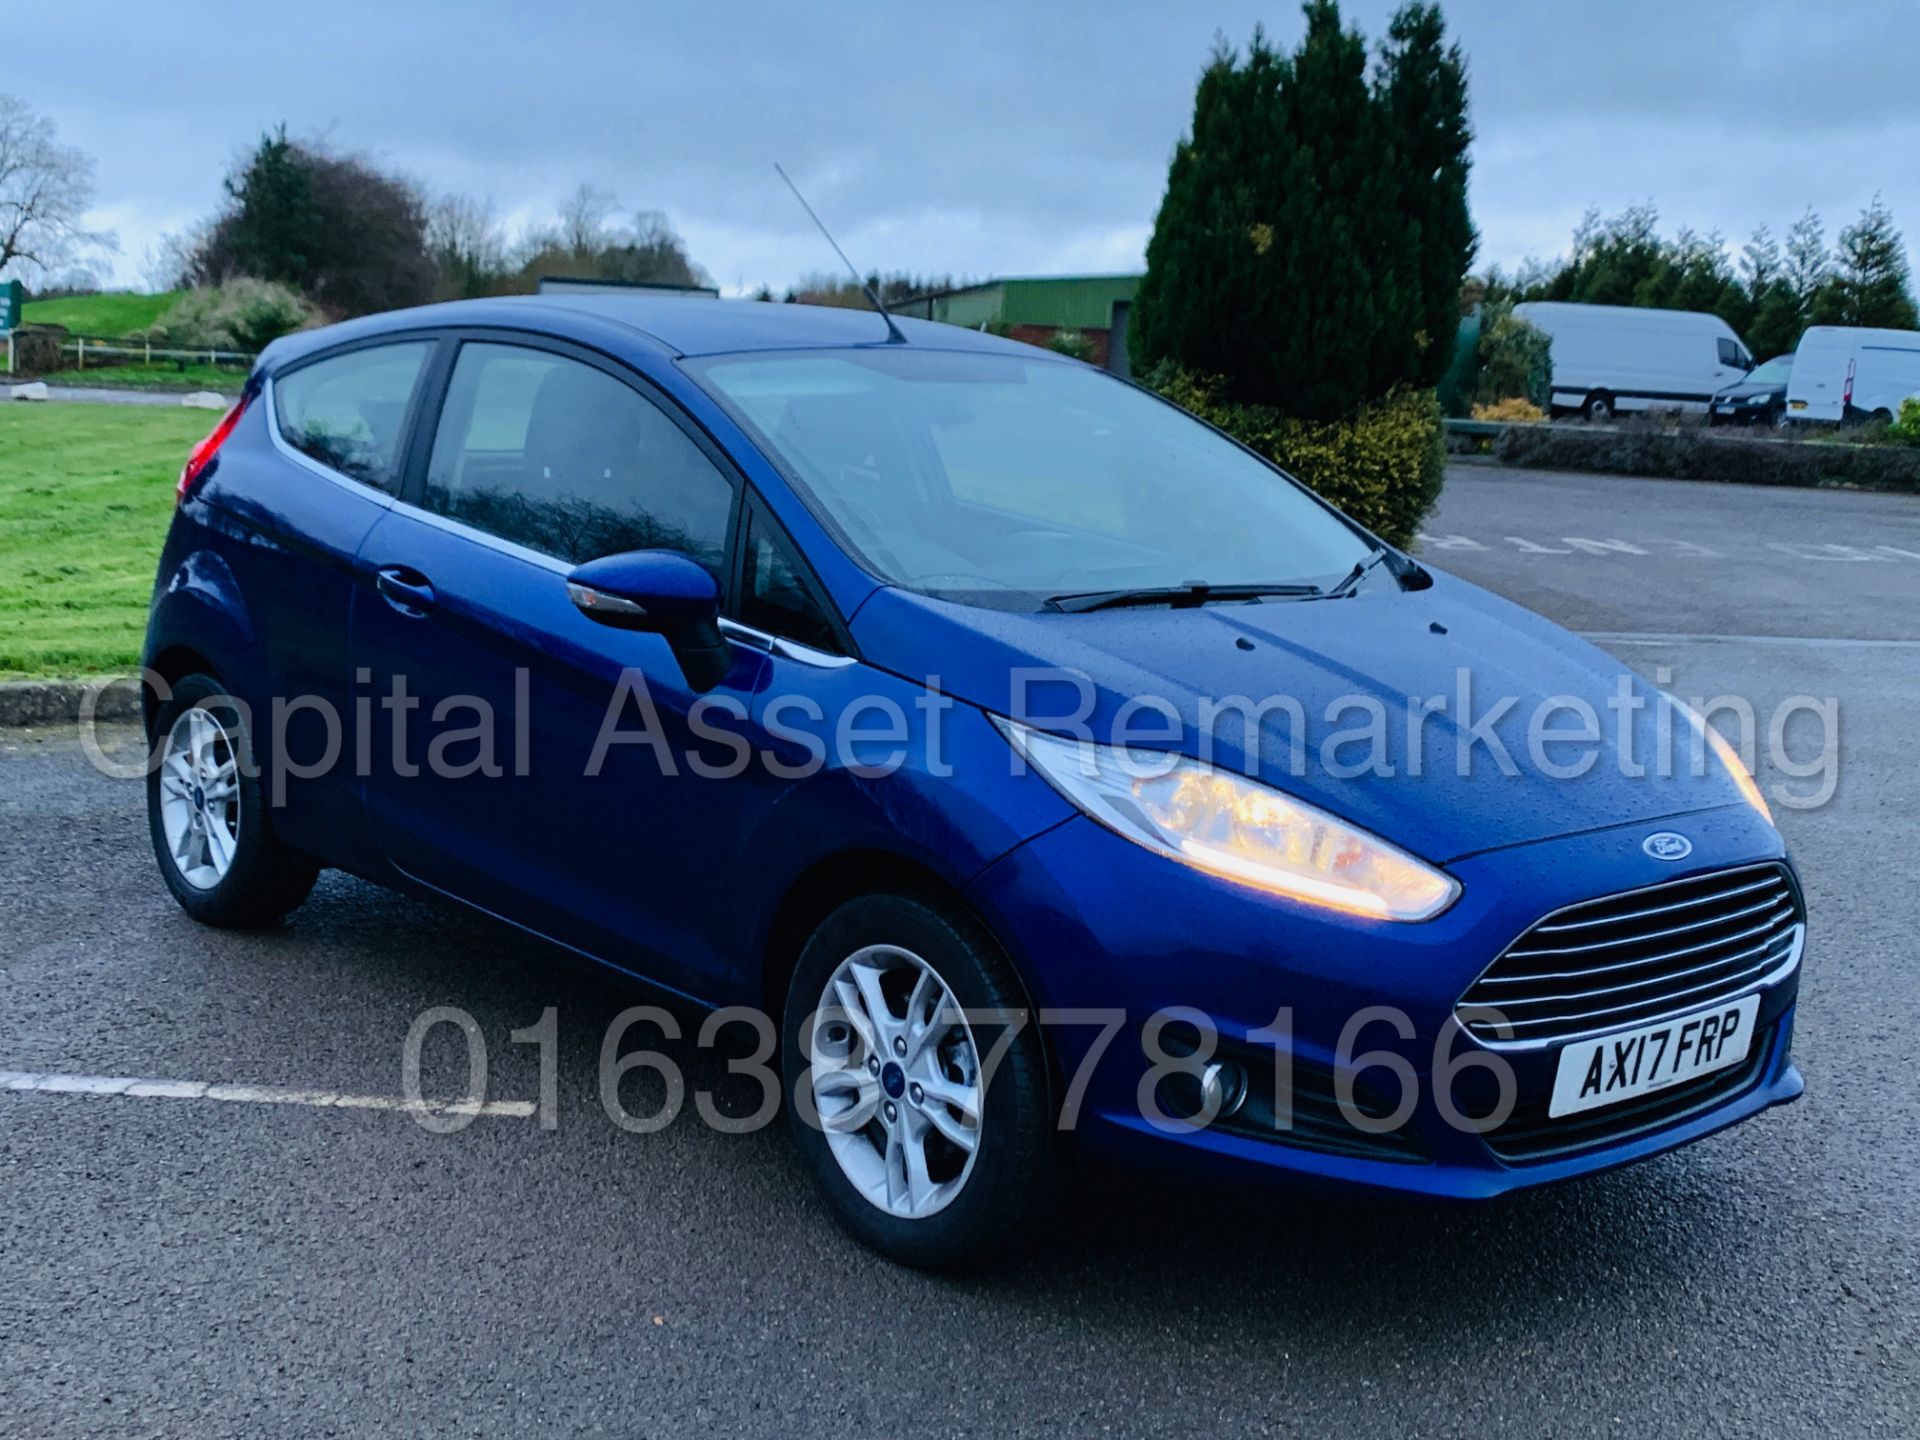 (On Sale) FORD FIESTA *ZETEC EDITION* (2017) '1.2 PETROL - 5 SPEED' *AIR CON & SAT NAV* 17,000 MILES - Image 11 of 40